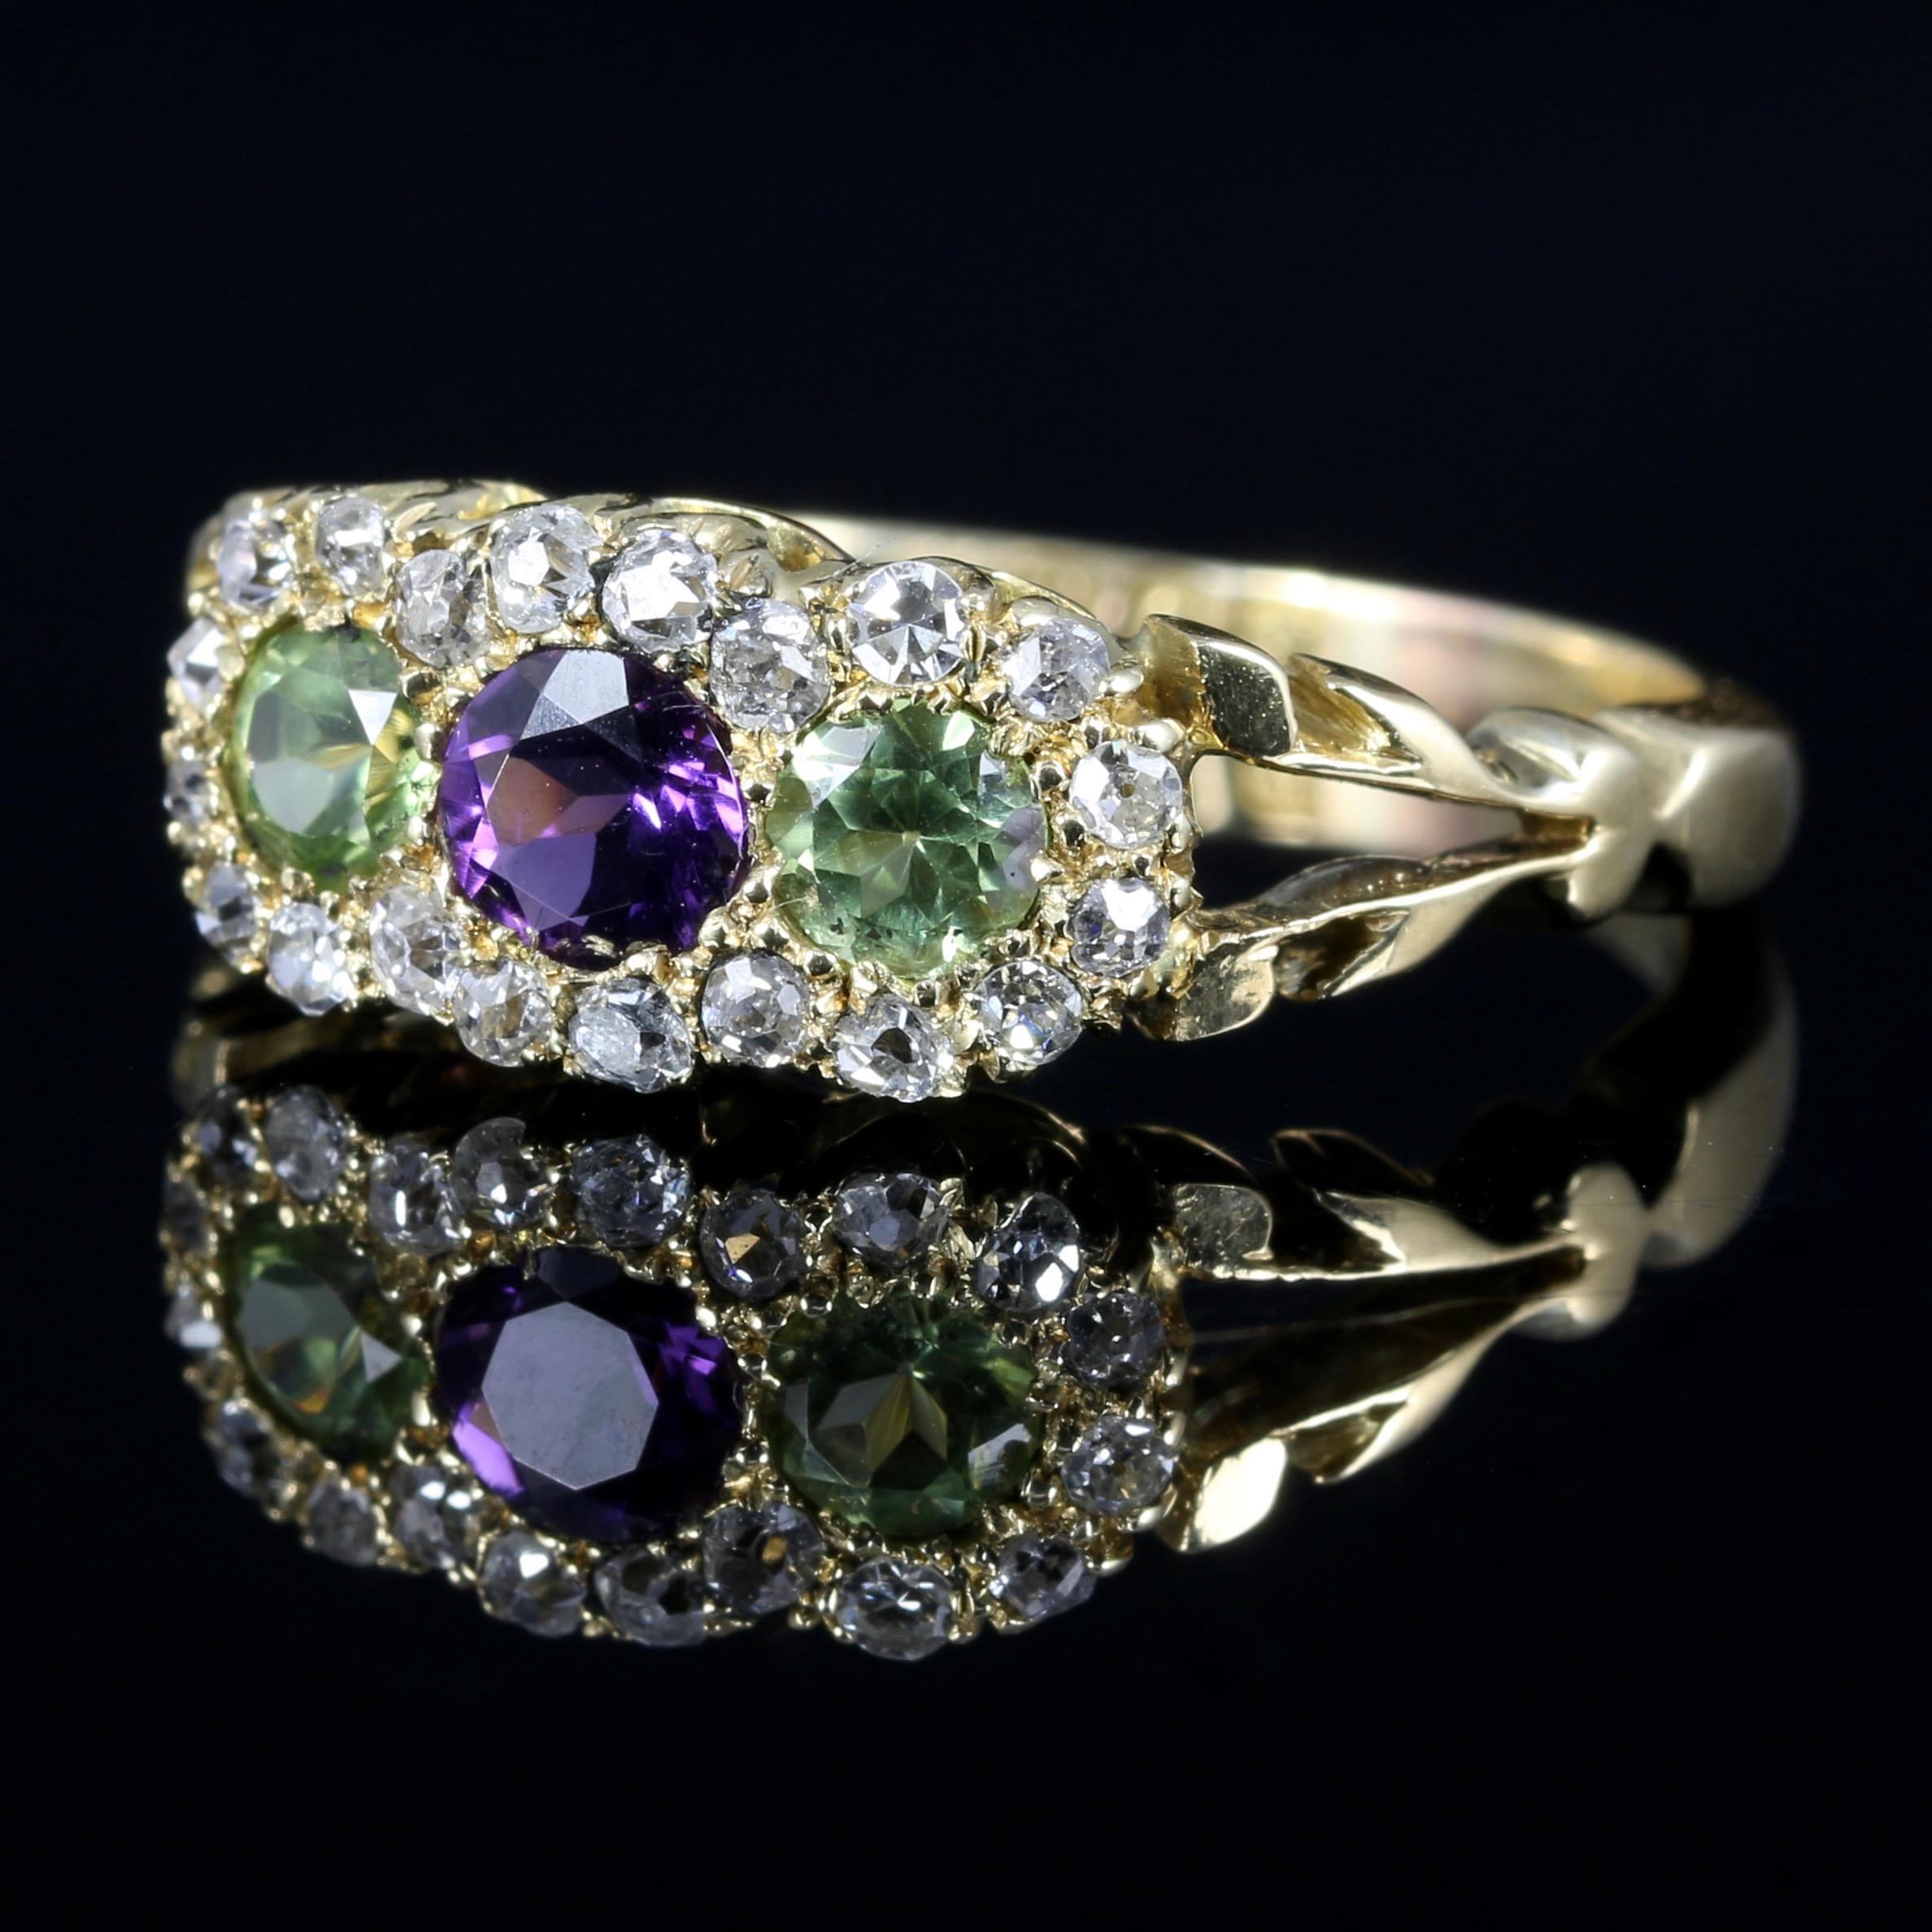 For more details please click continue reading down below...

This spectacular antique Victorian ring was made representing the Suffragette movement, Circa 1900.

Suffragettes liked to be depicted as feminine, their jewellery popularly consisted of